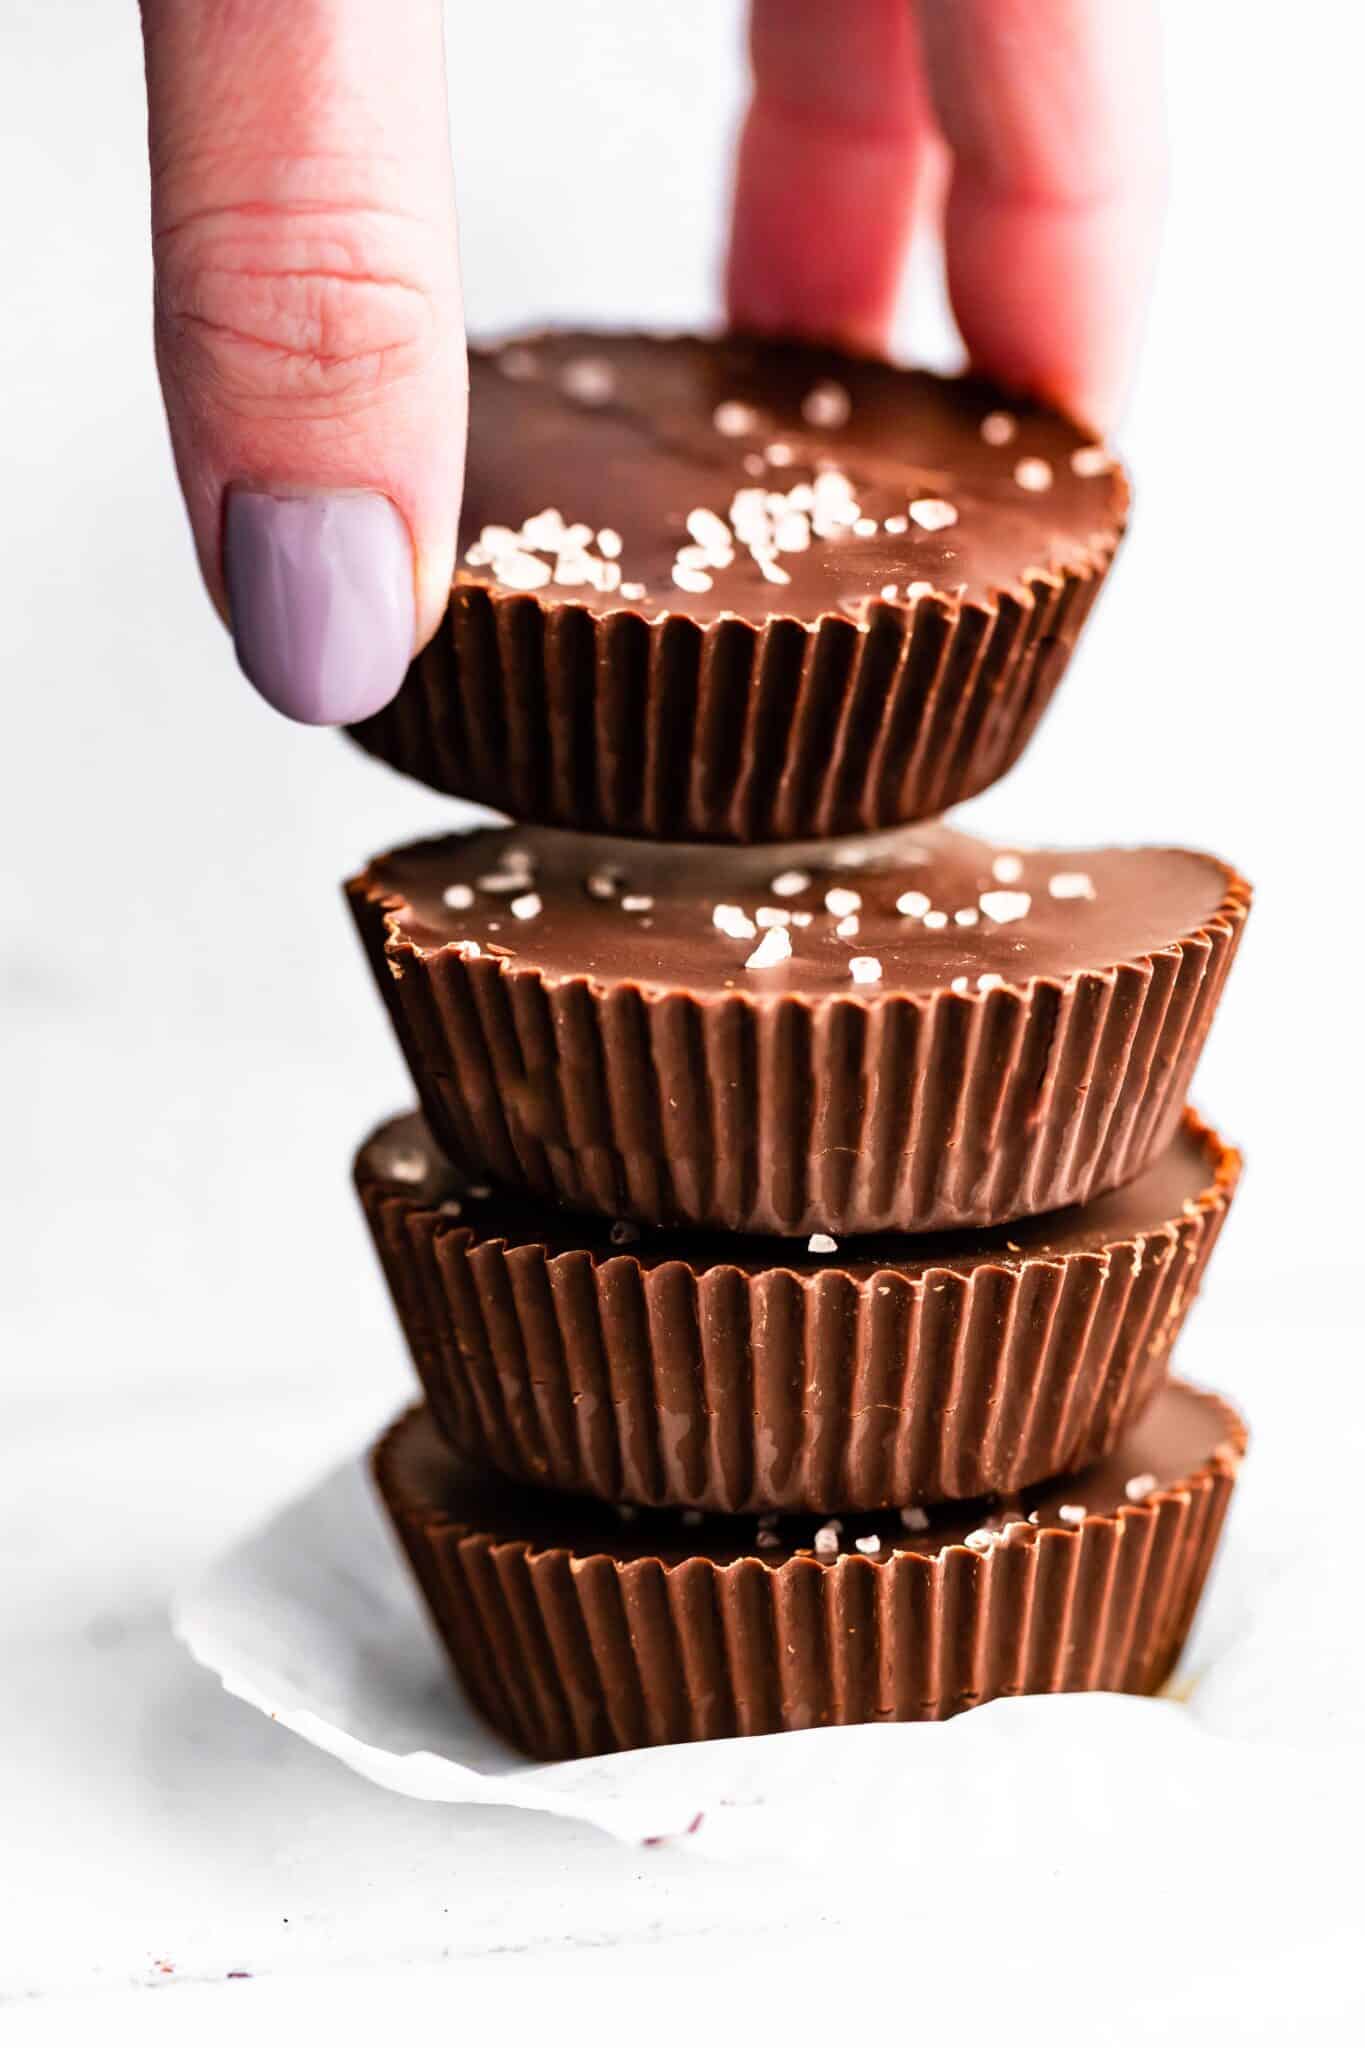 A woman's hands lifting a Chocolate Almond Butter Cup off of a stack of them.